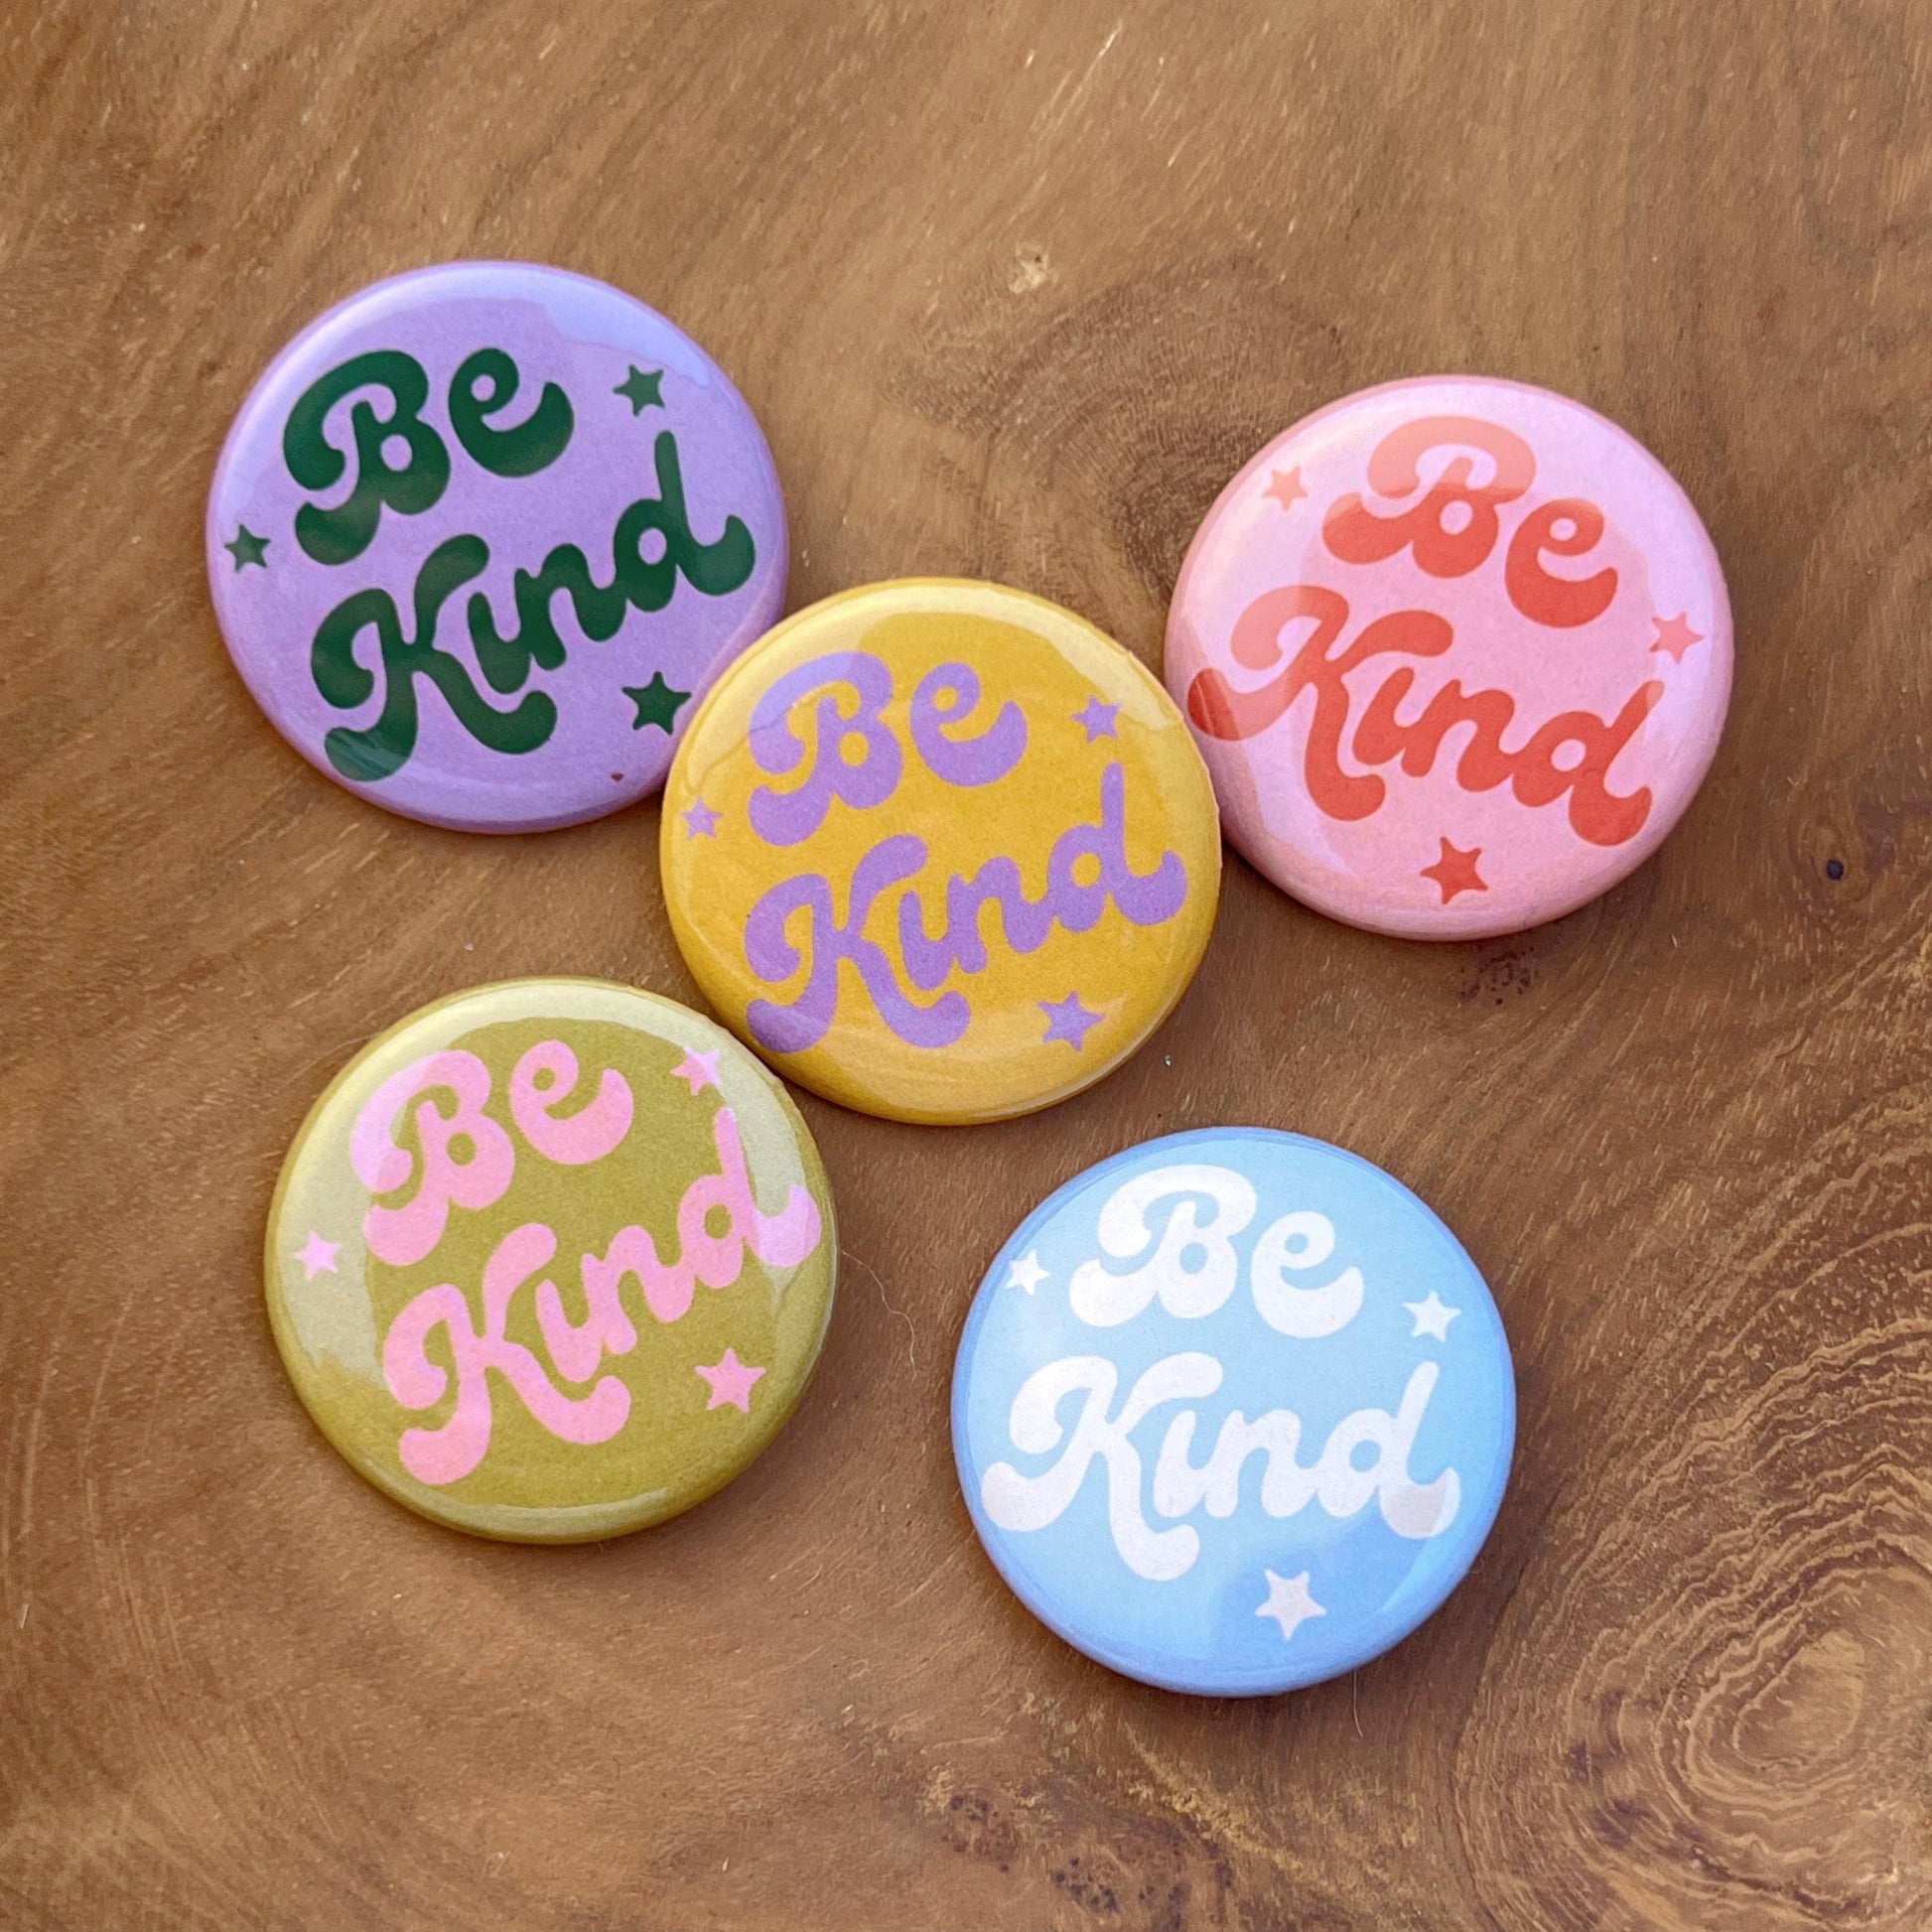 Enjoy The Now - Cute Pins for Bags, Mindfulness Button Pins and Badges, Mental Health Pins for Backpacks, Colorful 70s Retro Aesthetic Pins